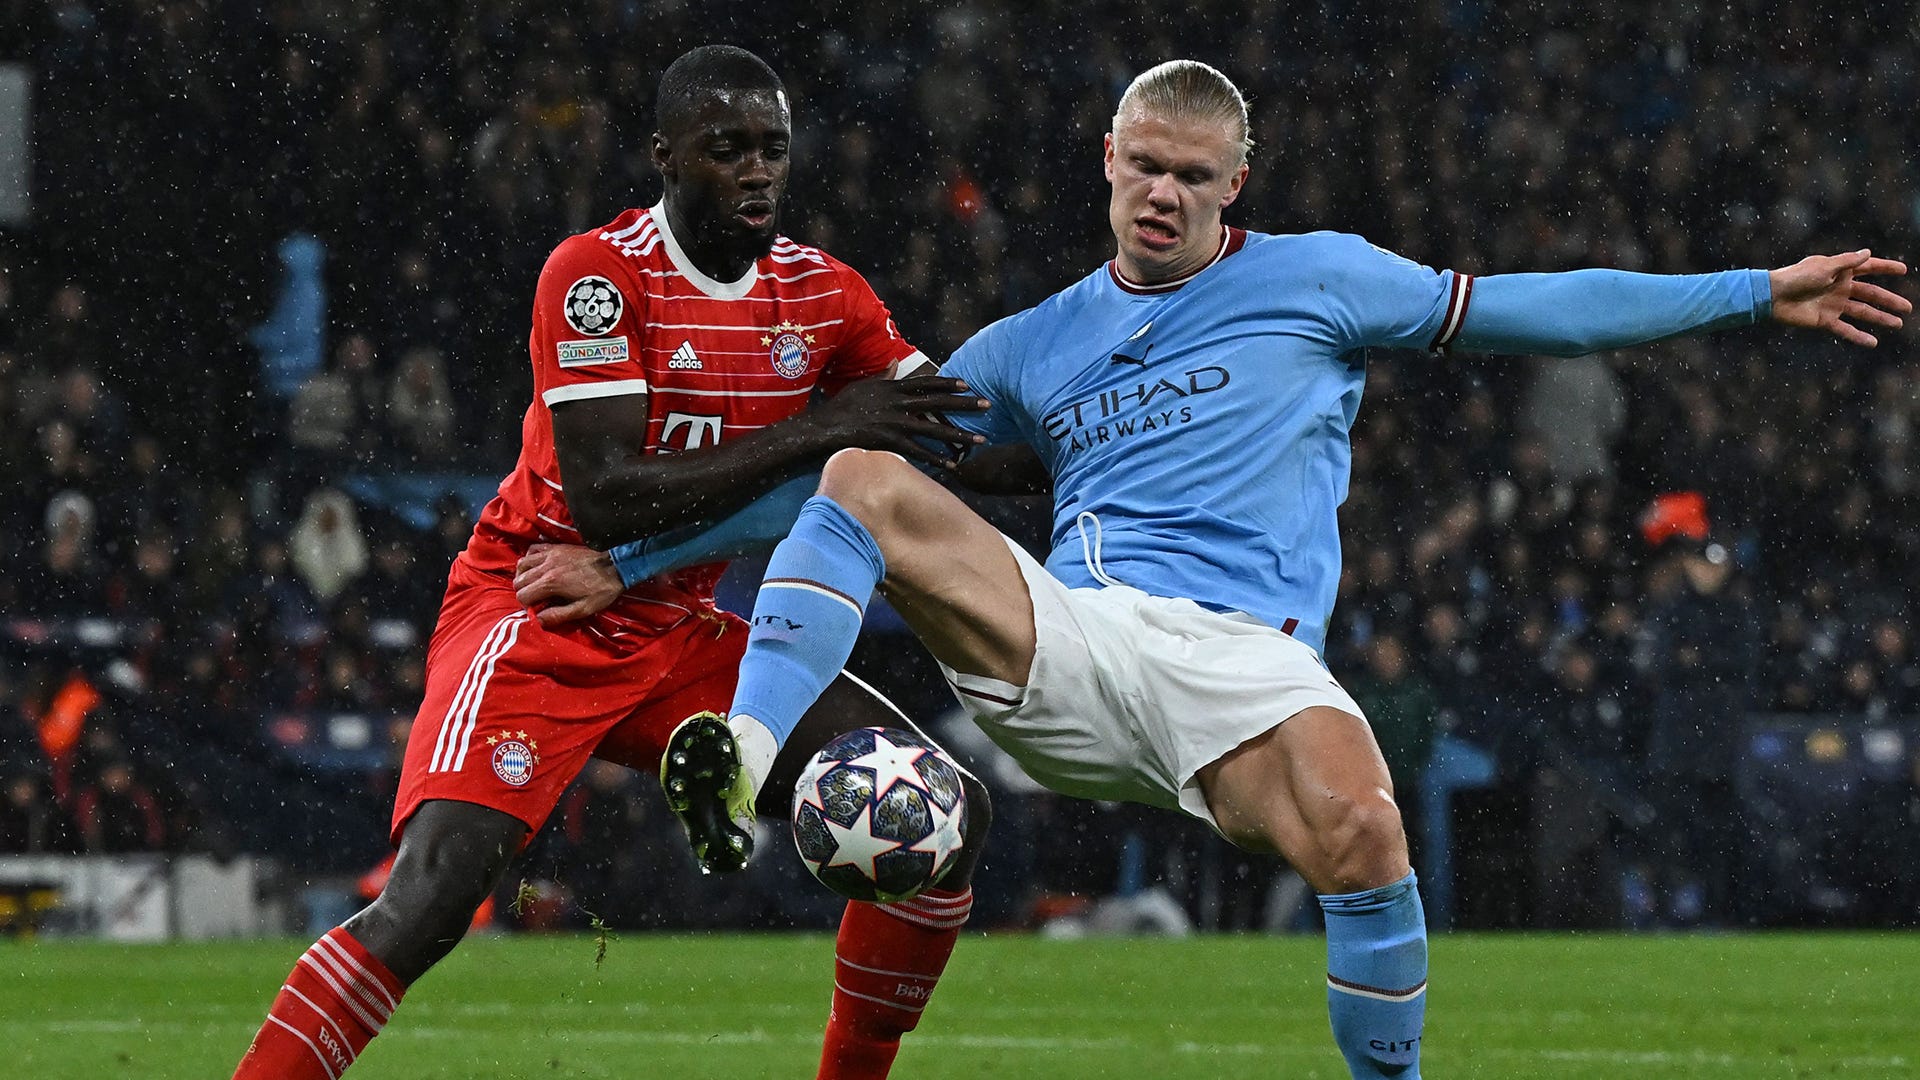 Bayern Munich vs Manchester City Where to watch the match online, live stream, TV channels and kick-off time Goal